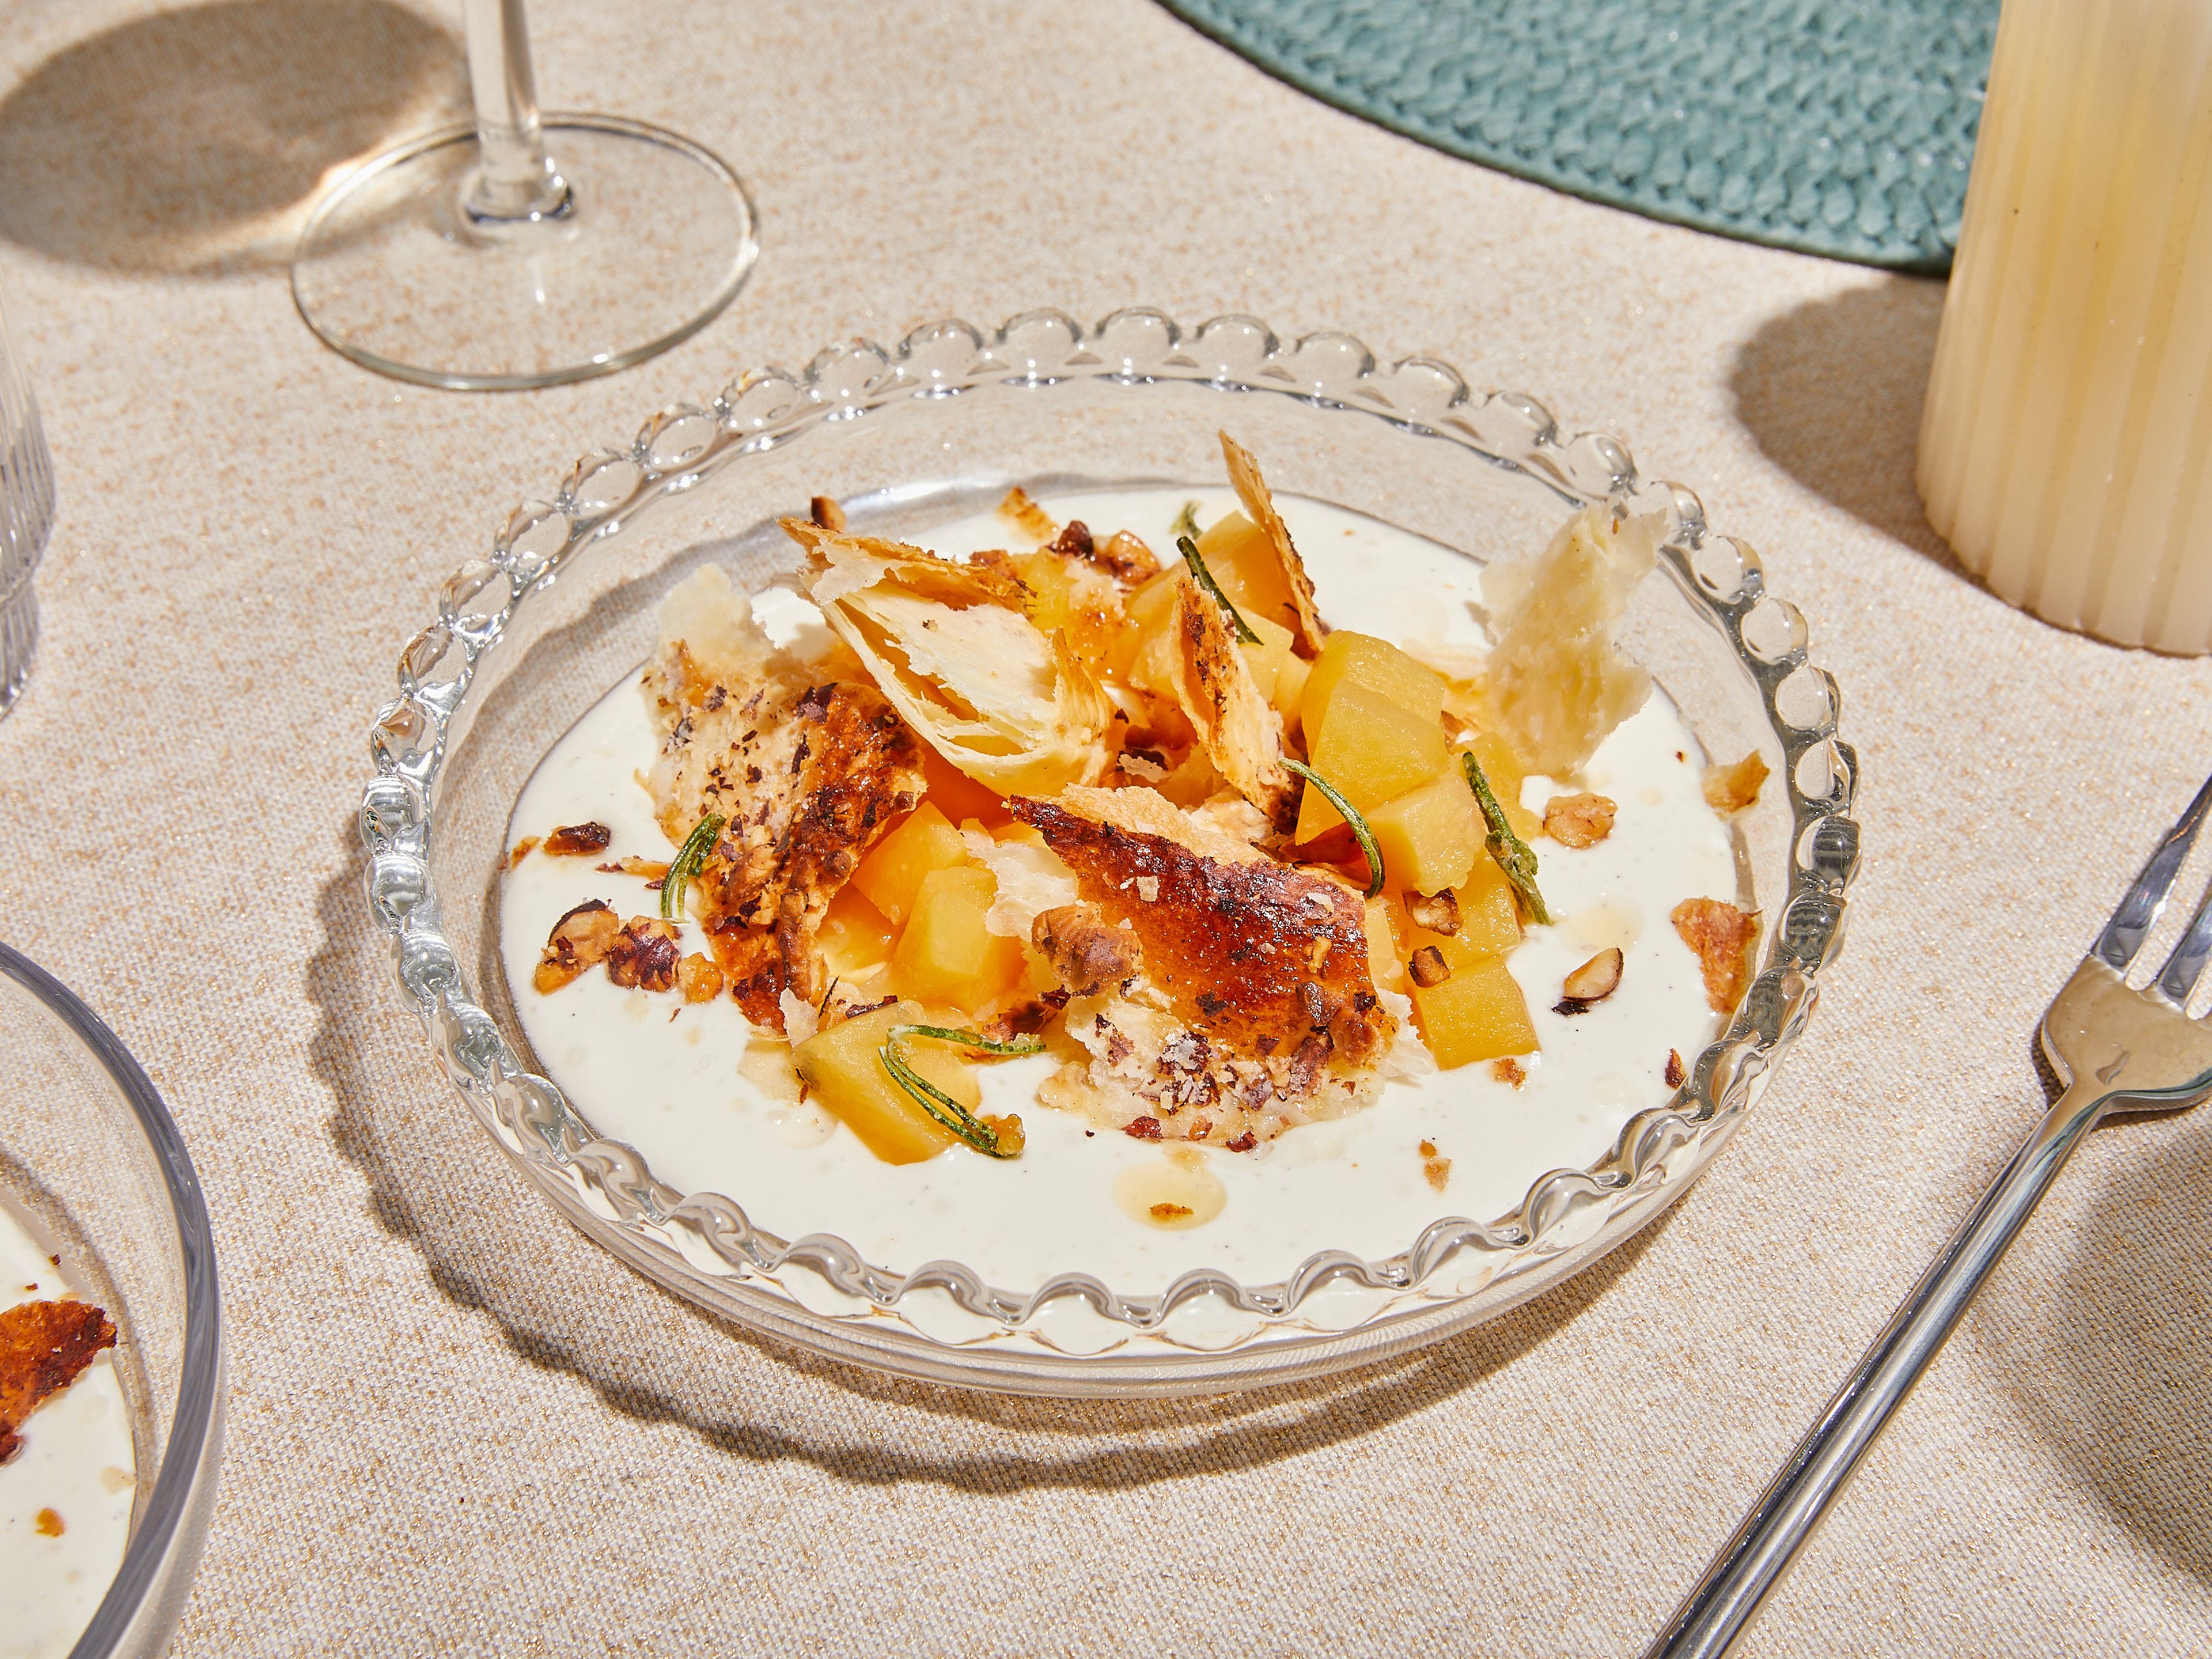 Poached quince with mascarpone and hazelnut crunch